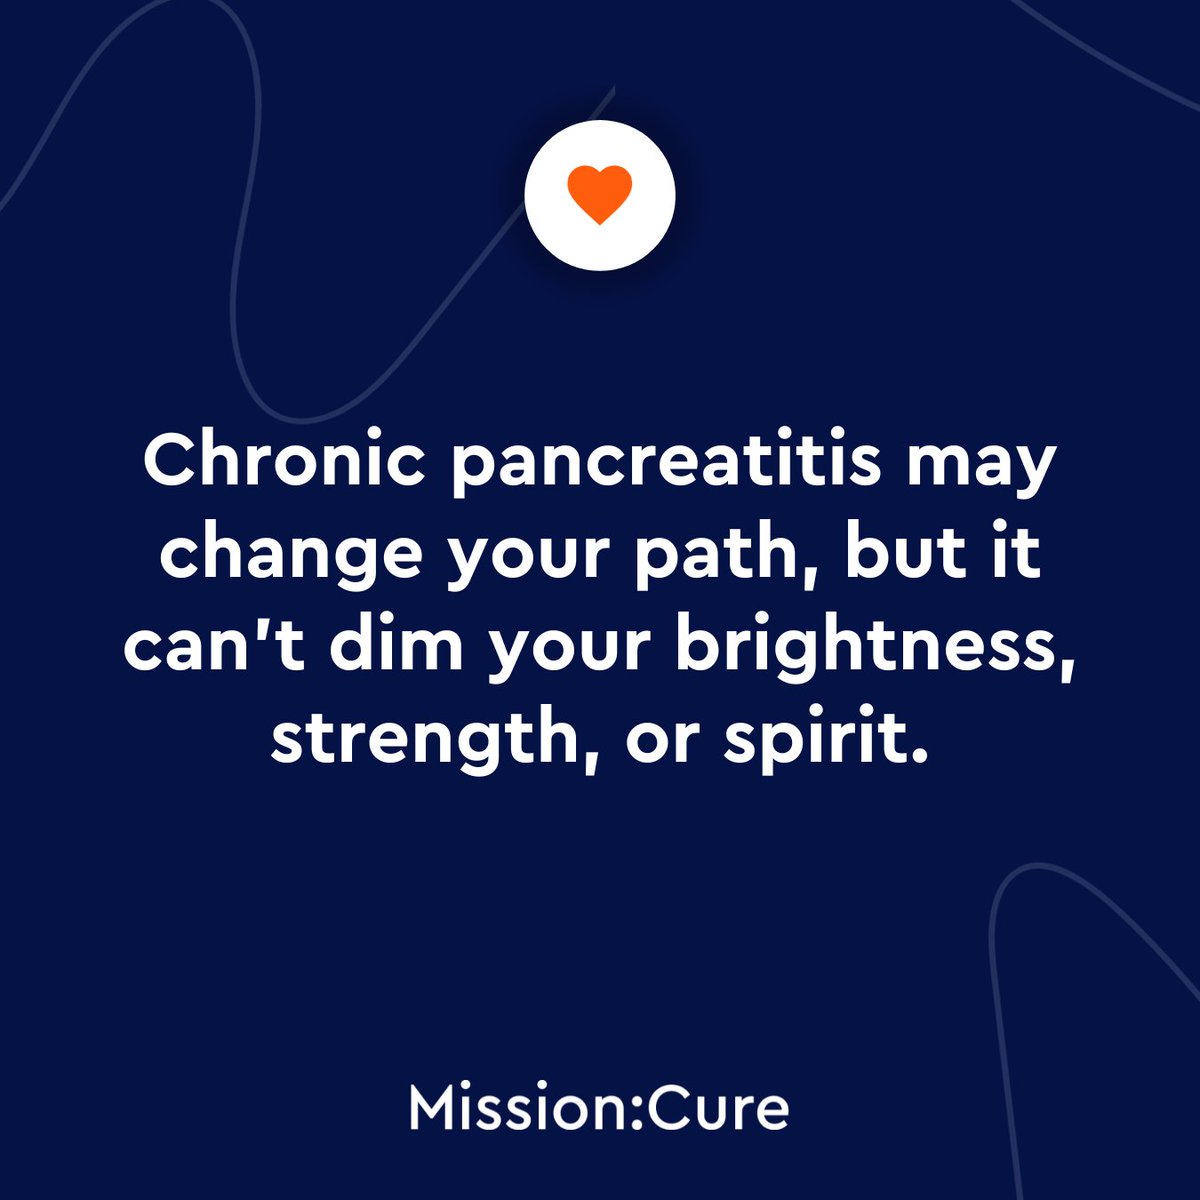 #MondayMotivation Reminder: Chronic pancreatitis may change your path, but it can't dim your brightness, strength, or spirit. This disease can never overshadow the incredible person you are! 💙✨